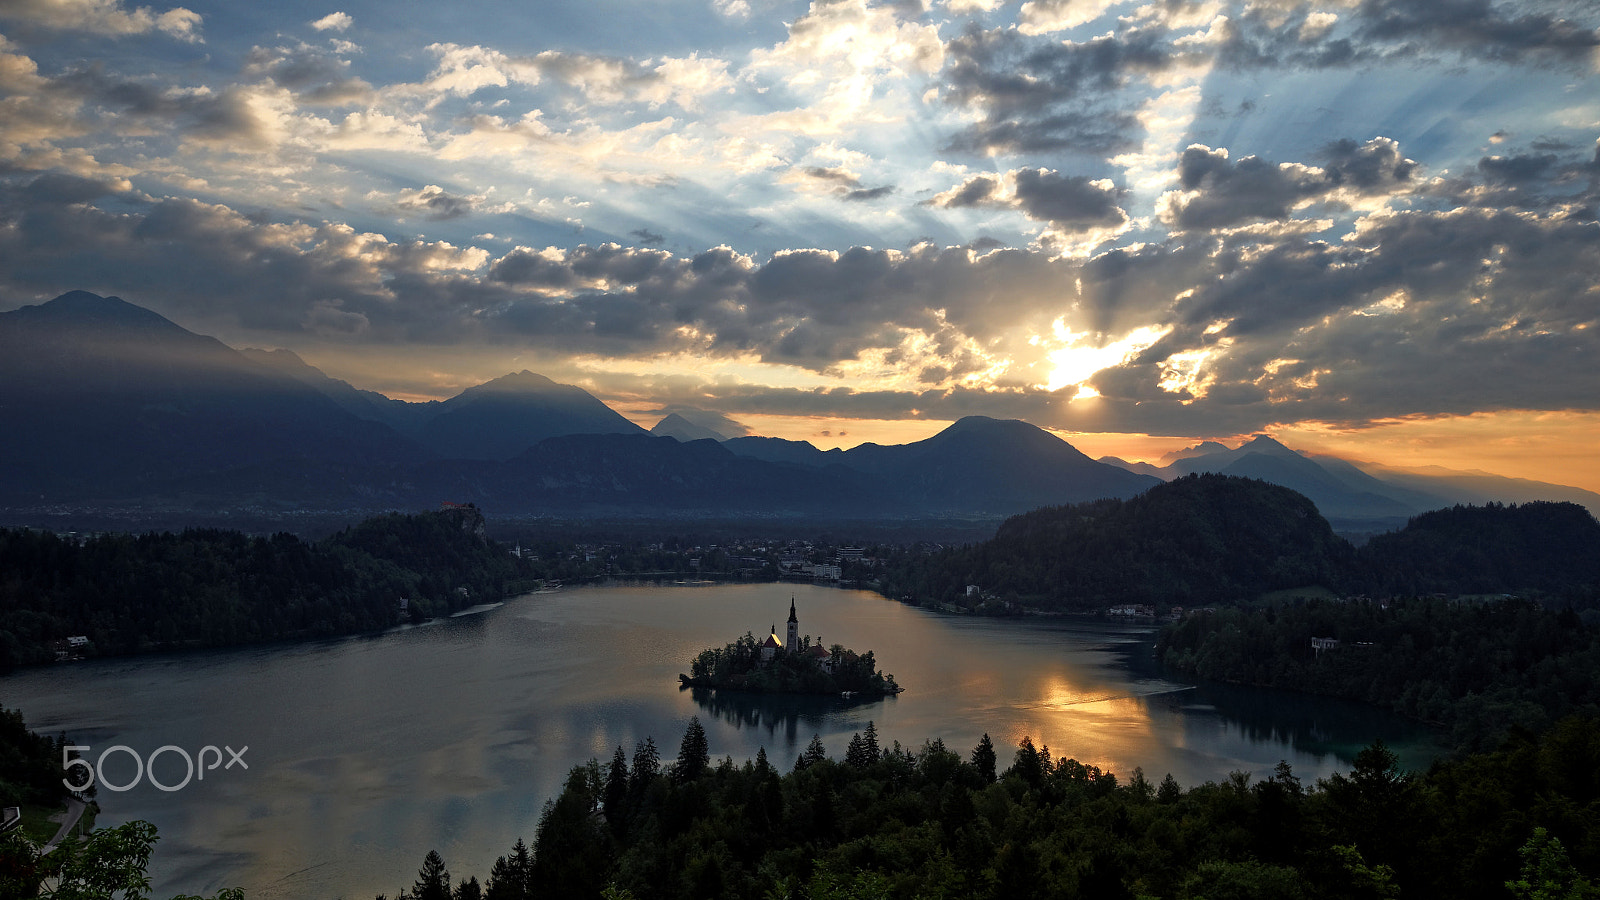 Pentax K-50 sample photo. Bled from ojstrica photography